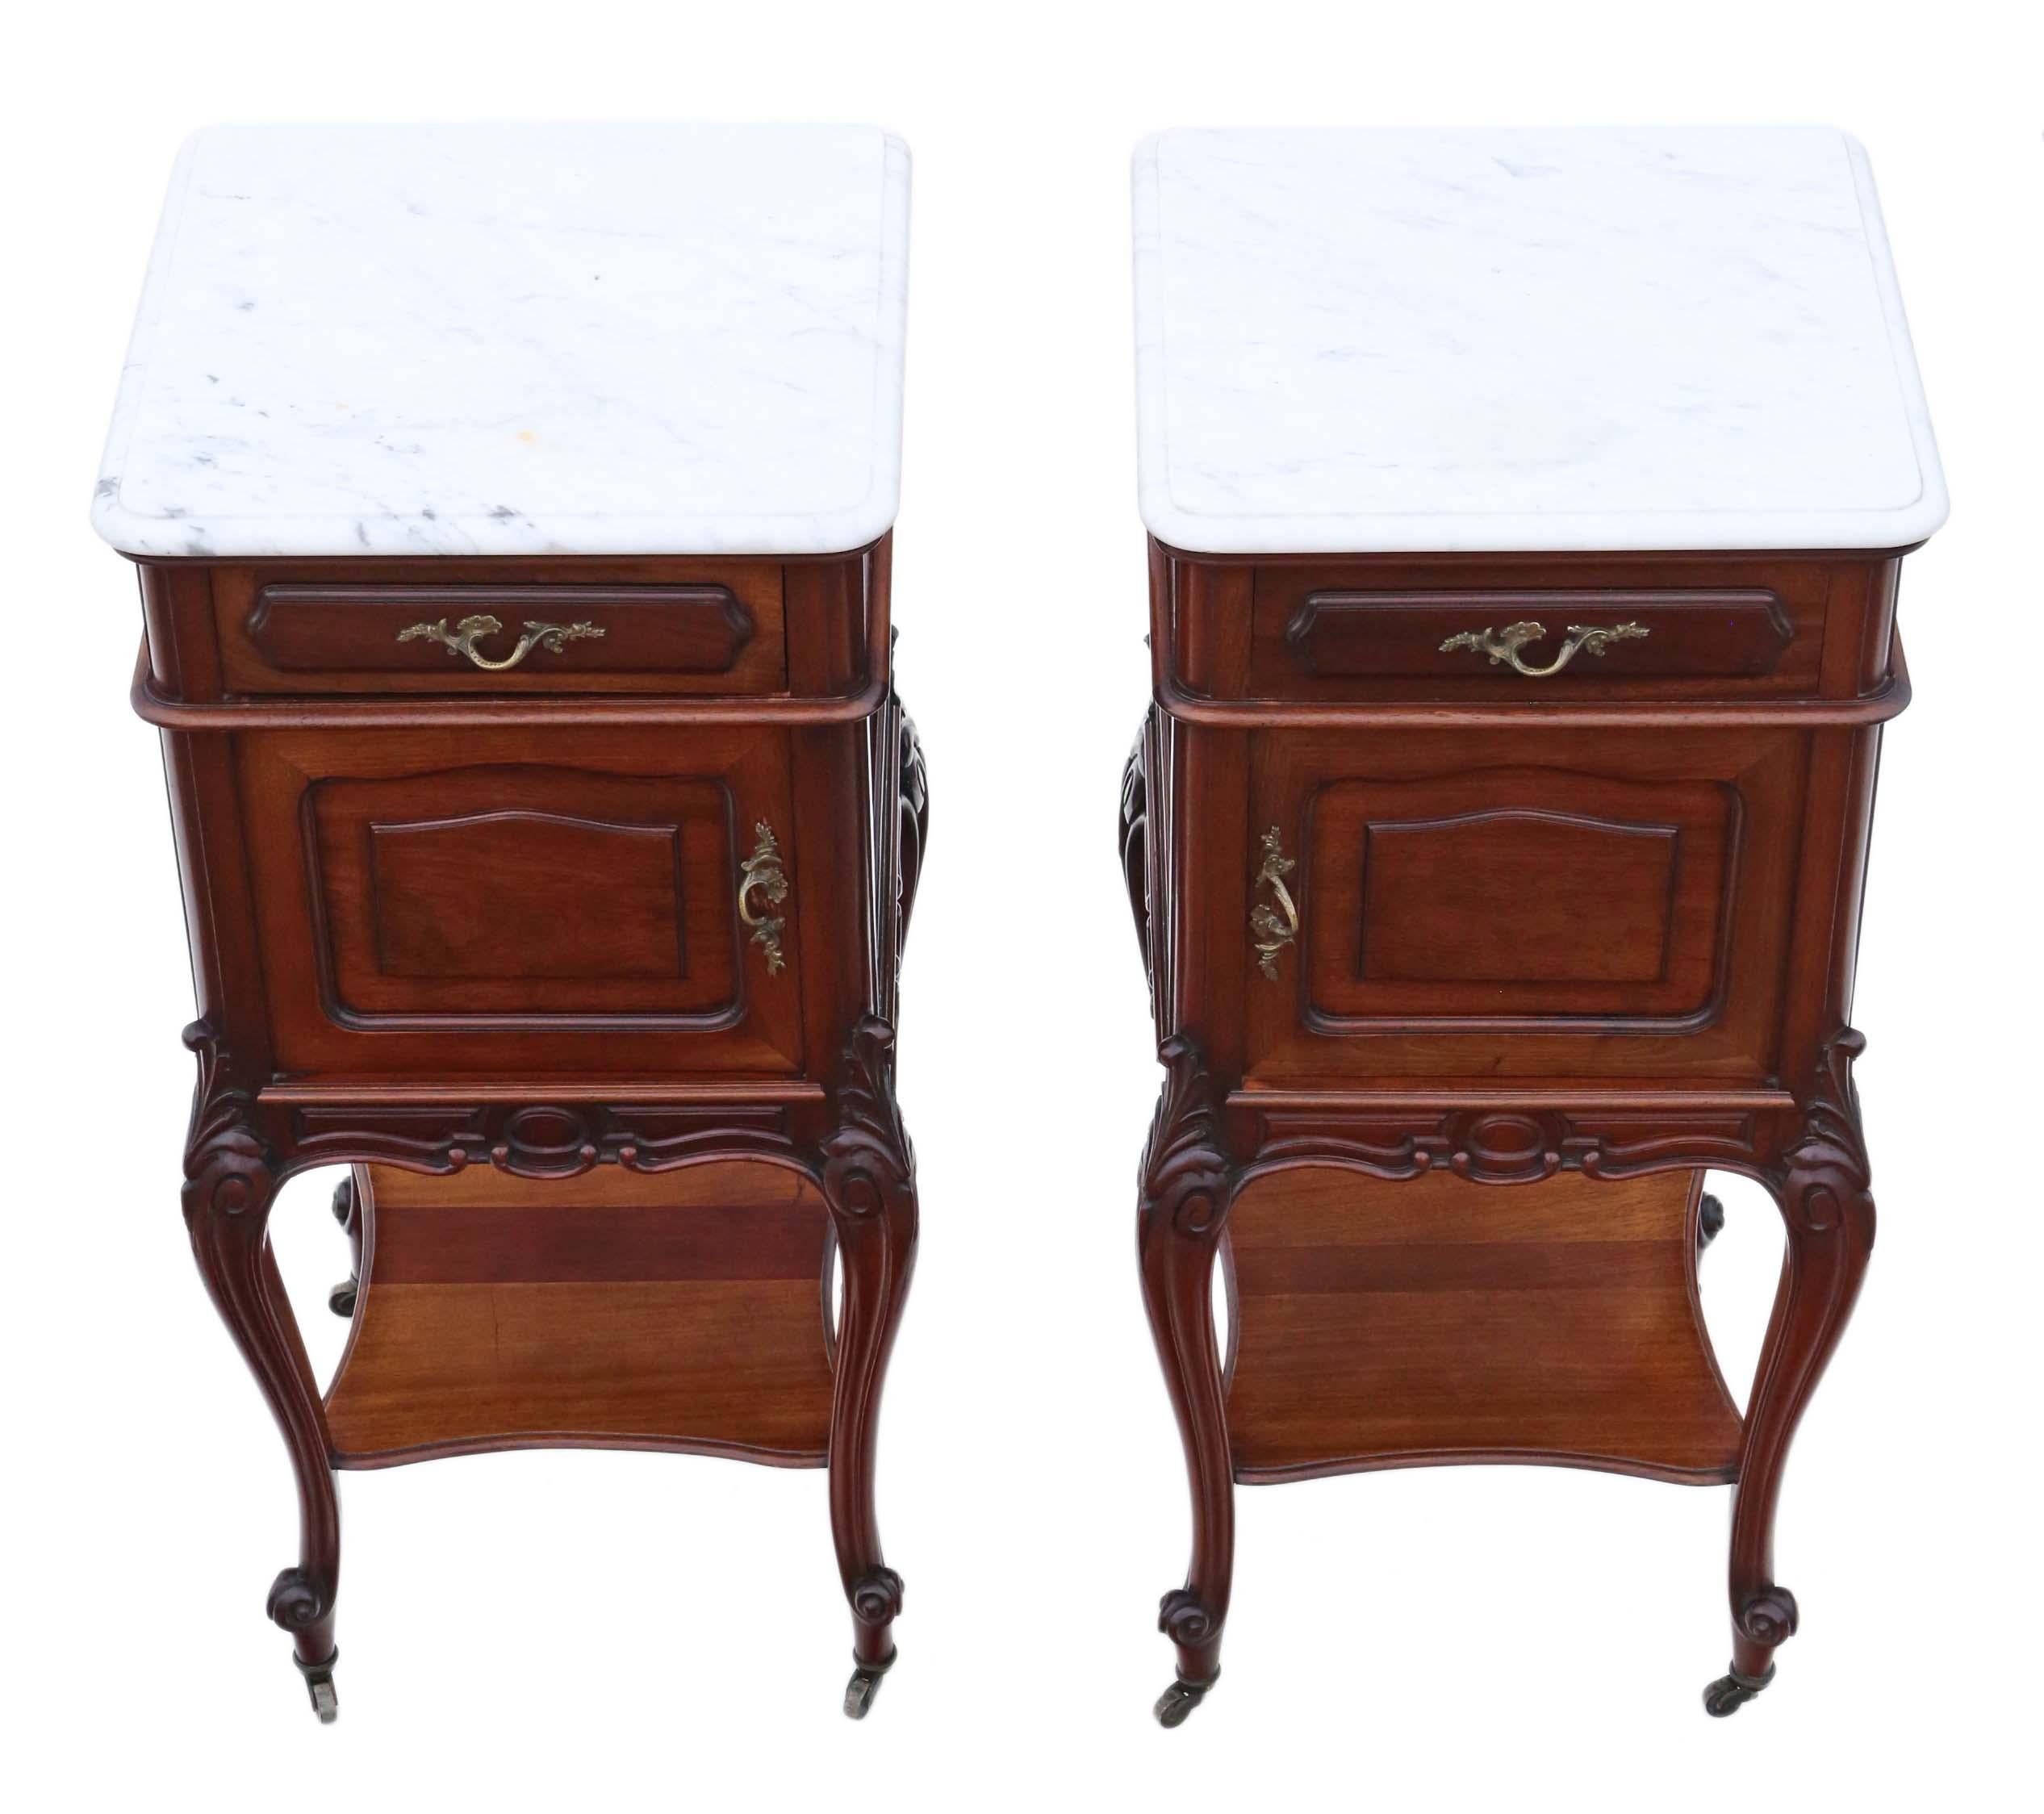 Antique Pair of French Bedside Tables Cupboards Marble Tops In Good Condition For Sale In Wisbech, Cambridgeshire